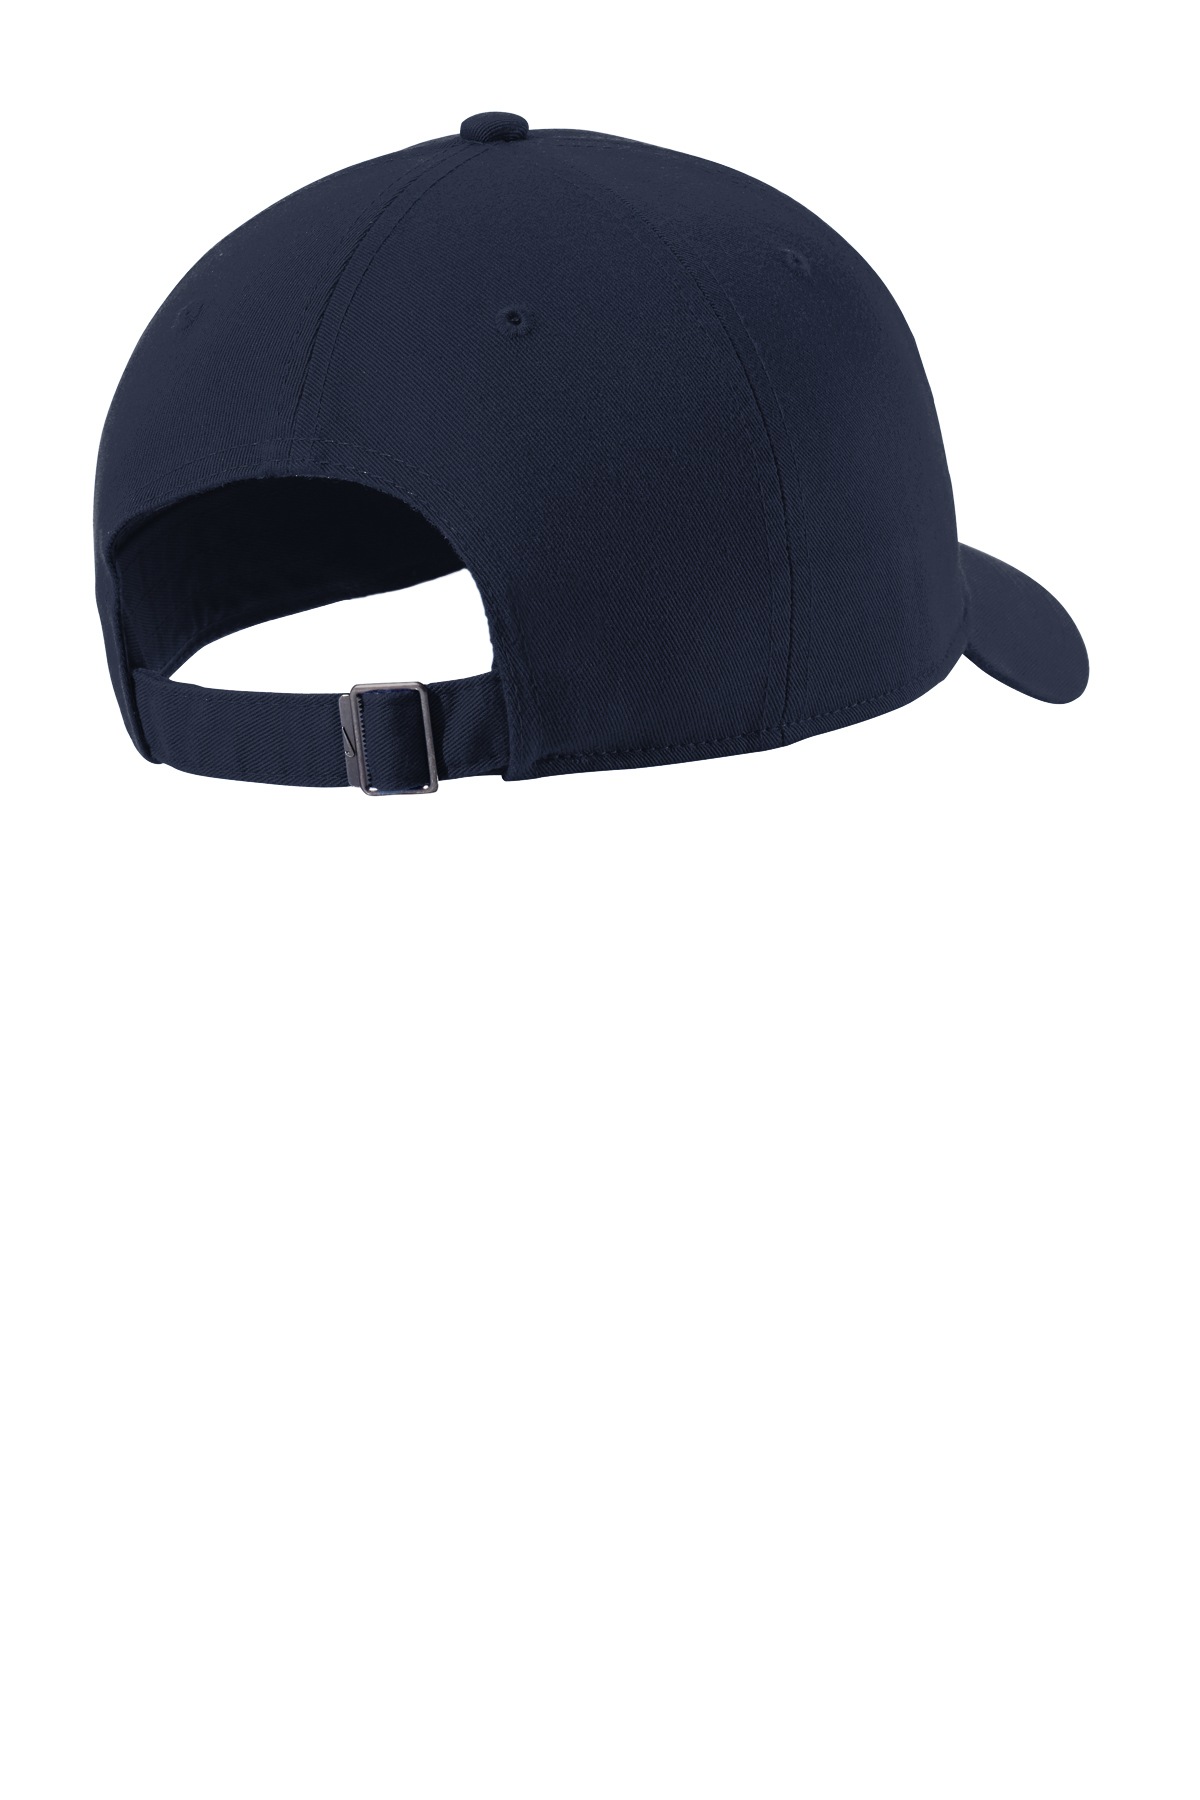 Nike Heritage Cotton Twill Cap | Product | Company Casuals